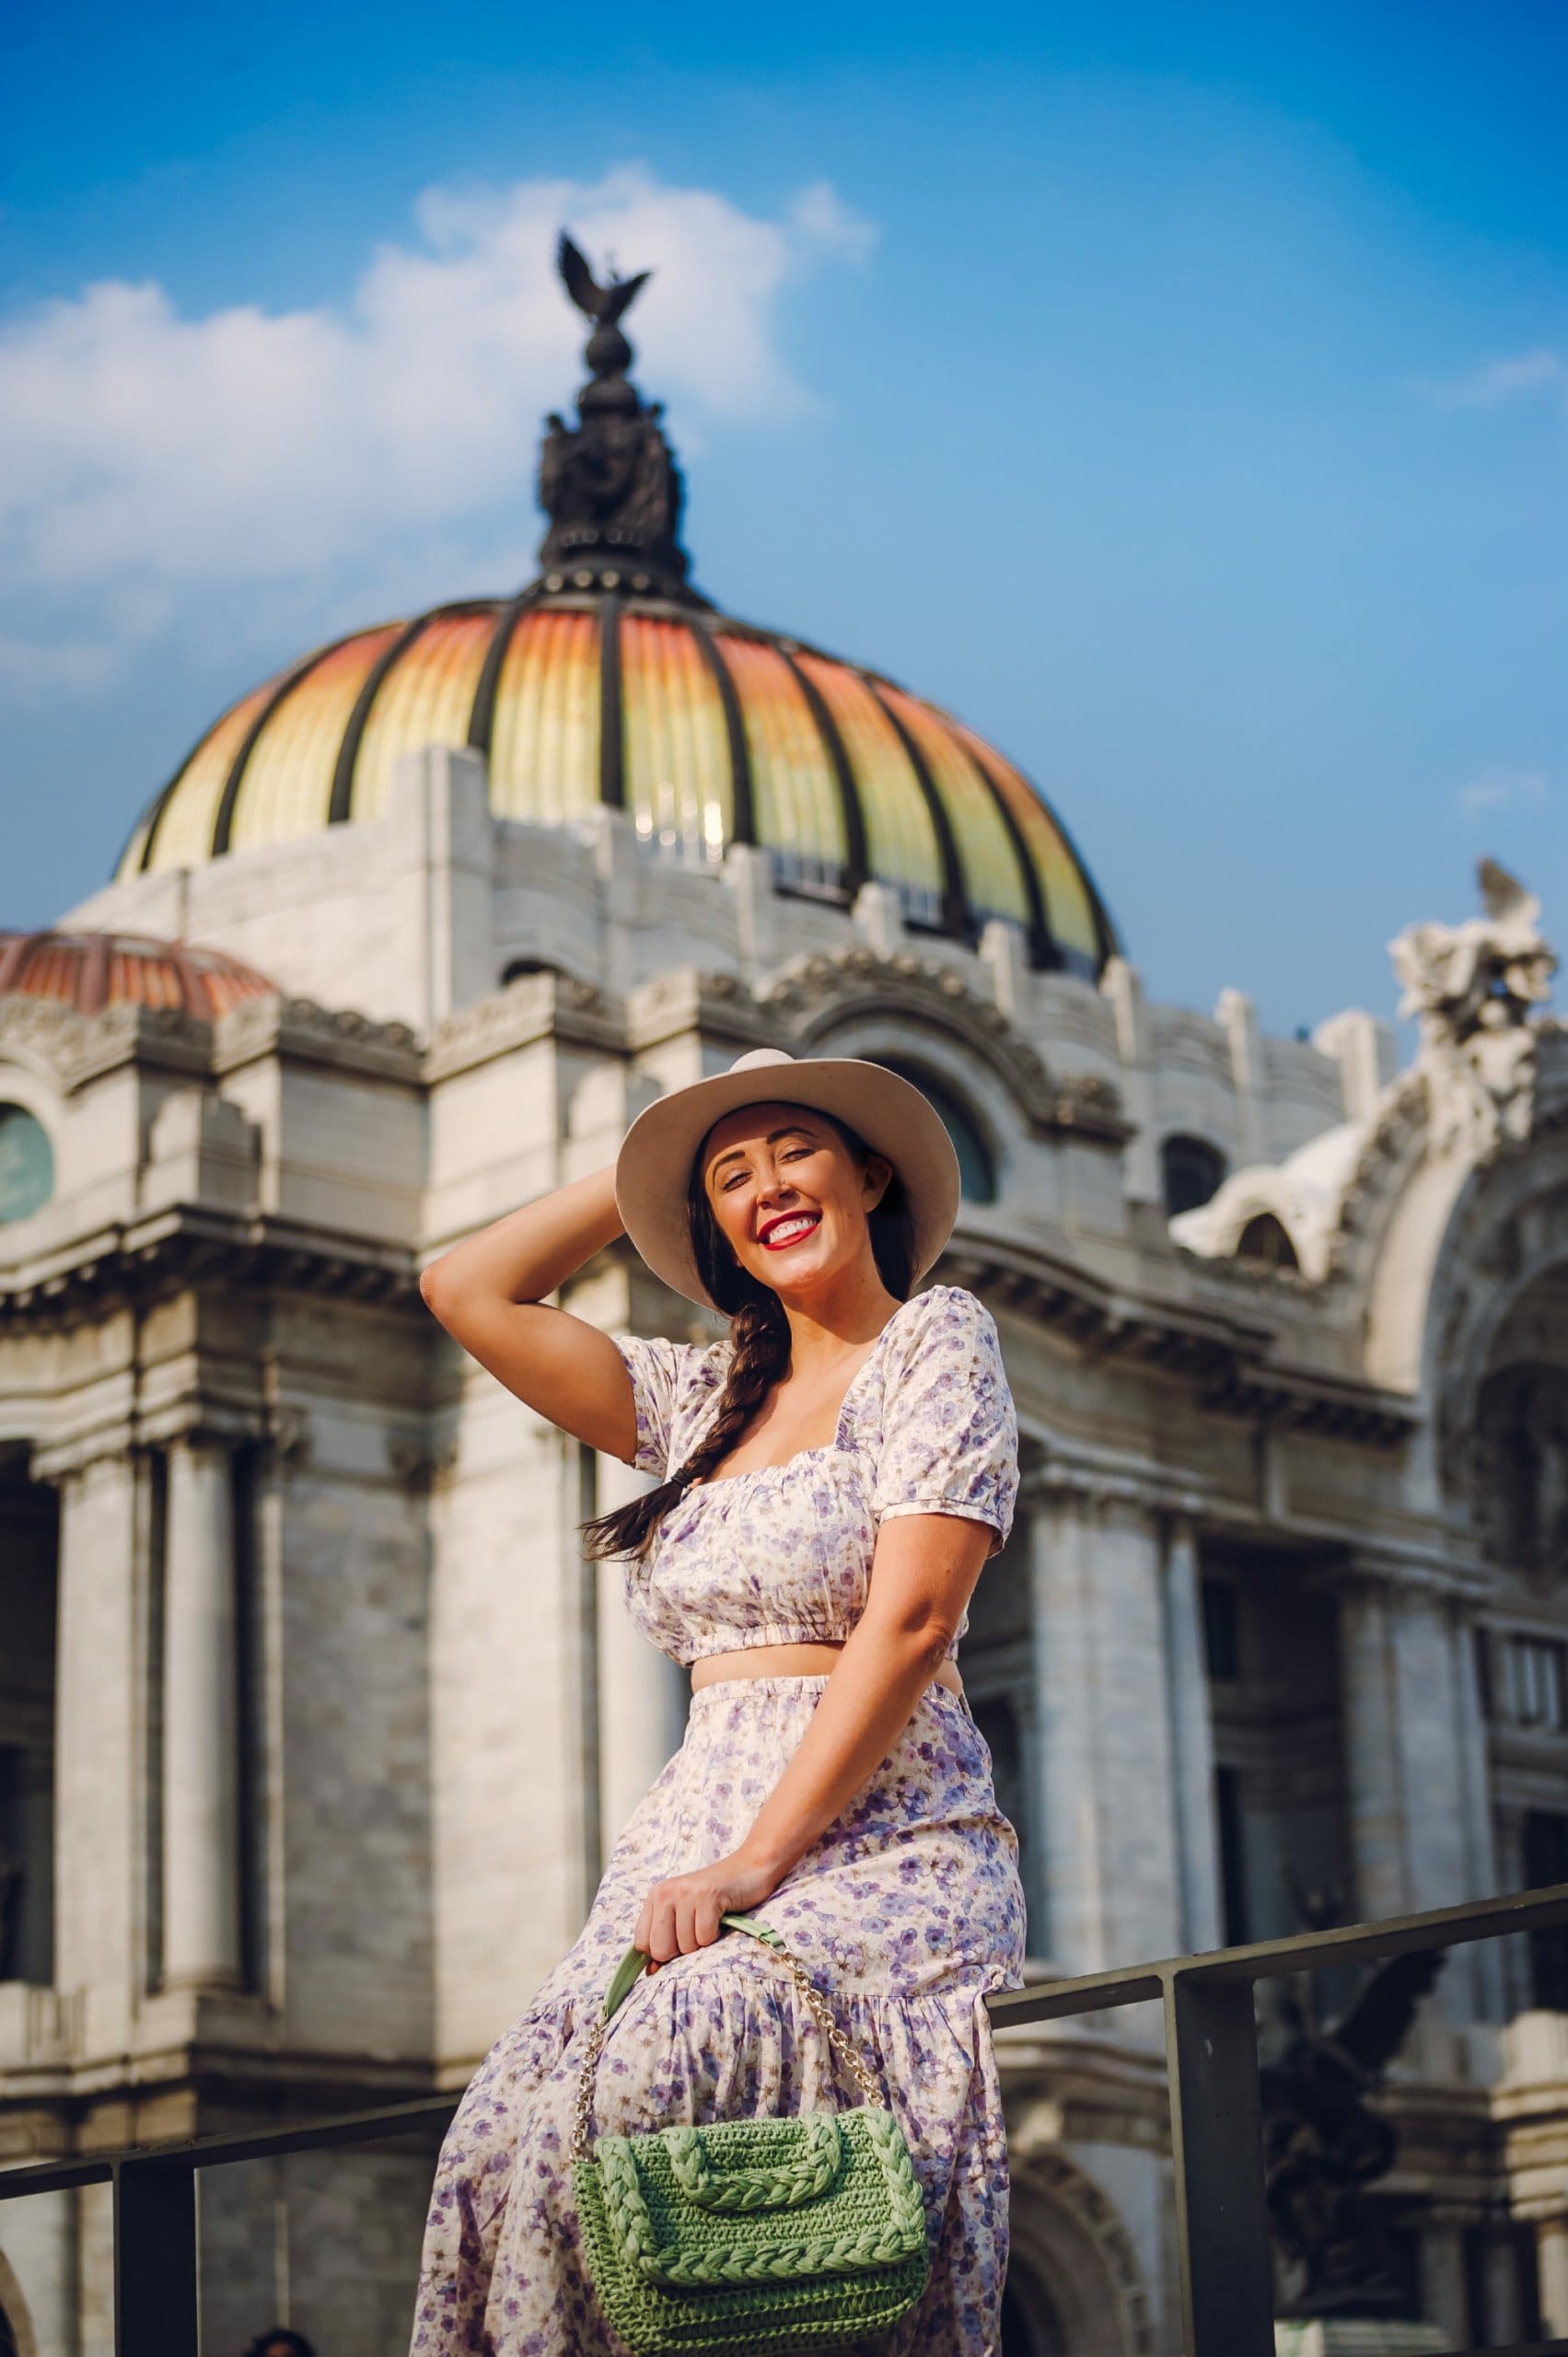 Mexico City Mini Guide - The Wanderlust Rose